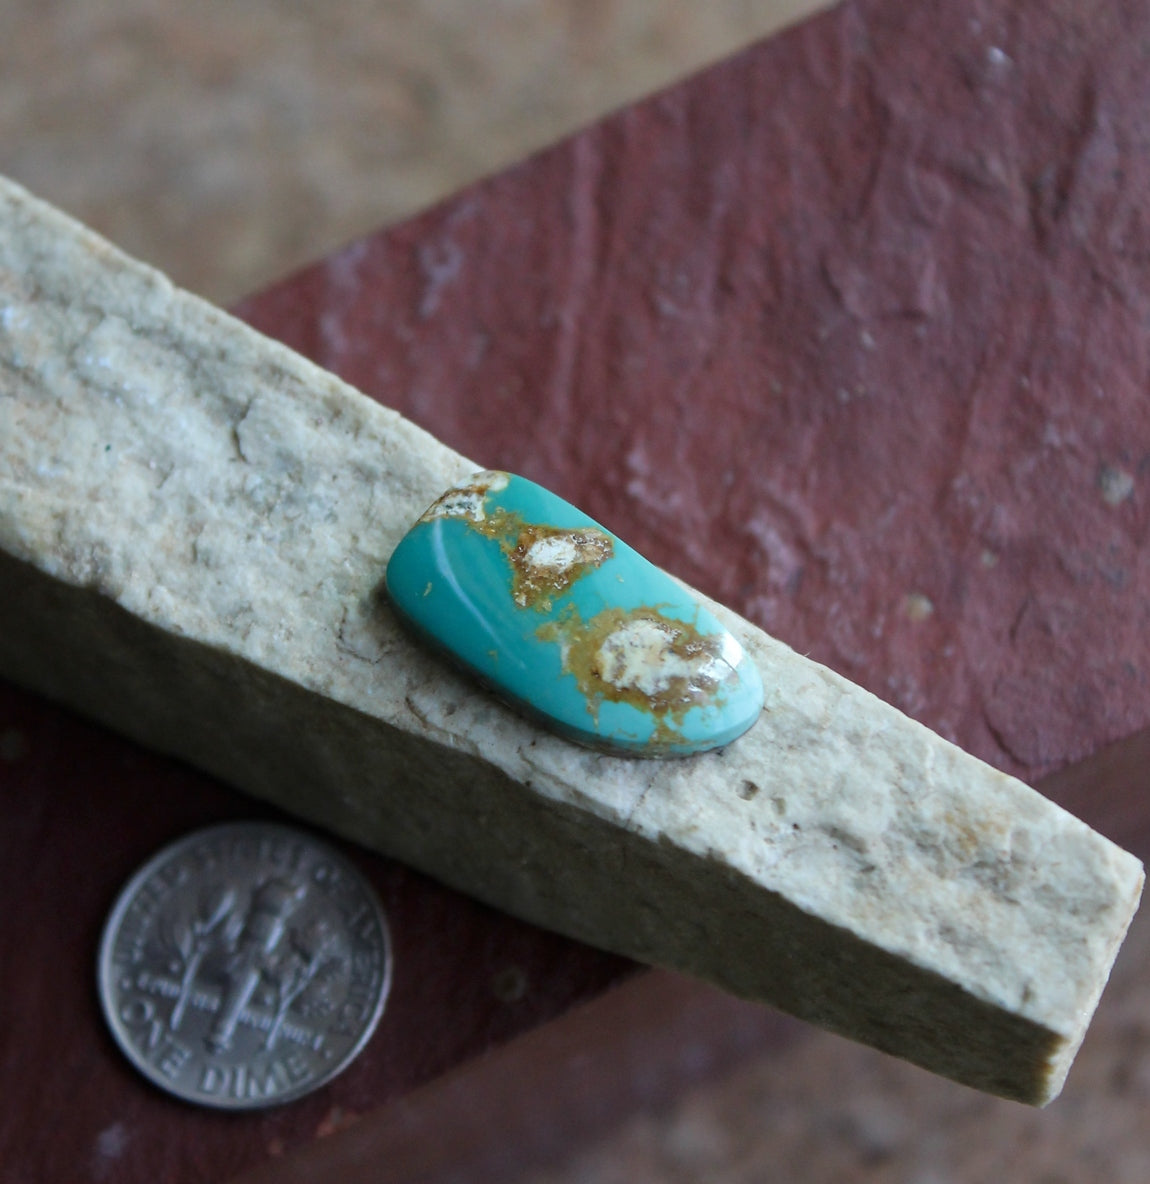 7 carat green teal Stone Mountain Turquoise cabochon